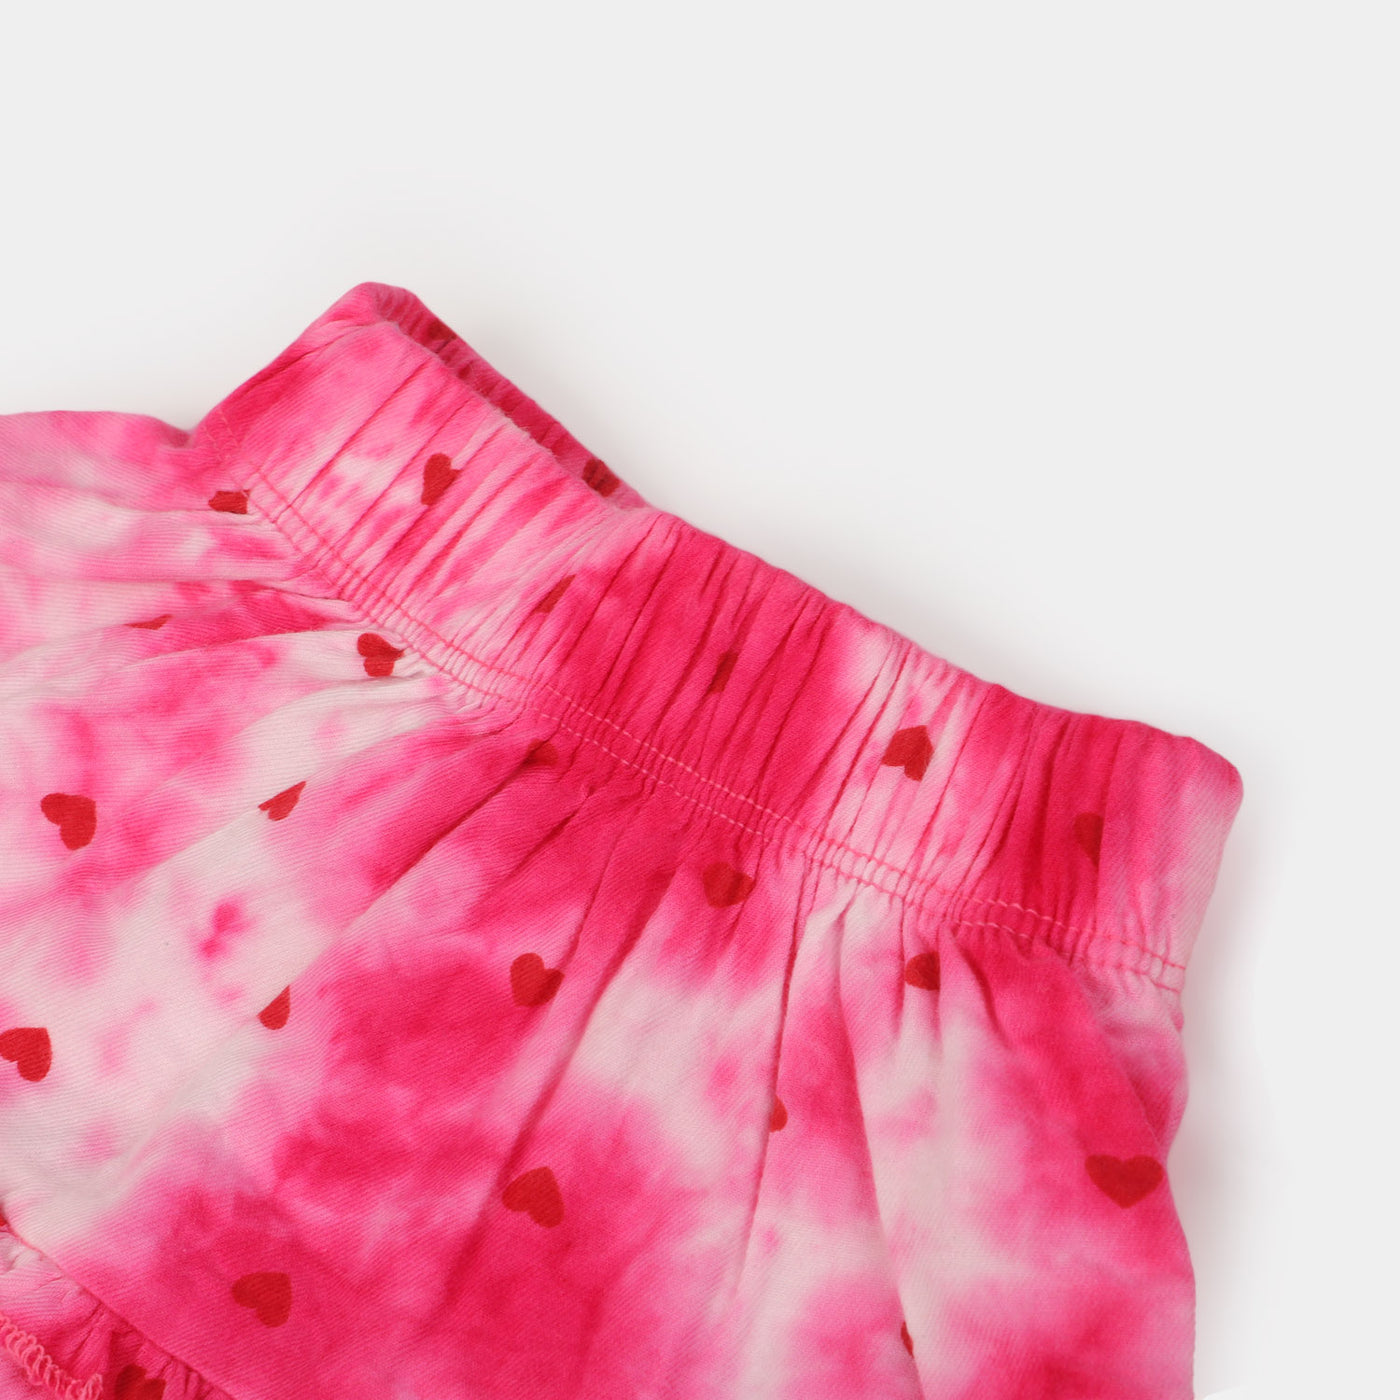 Infant Girls Cotton Casual Skirt Tie Dye Hearts - Hot Pink